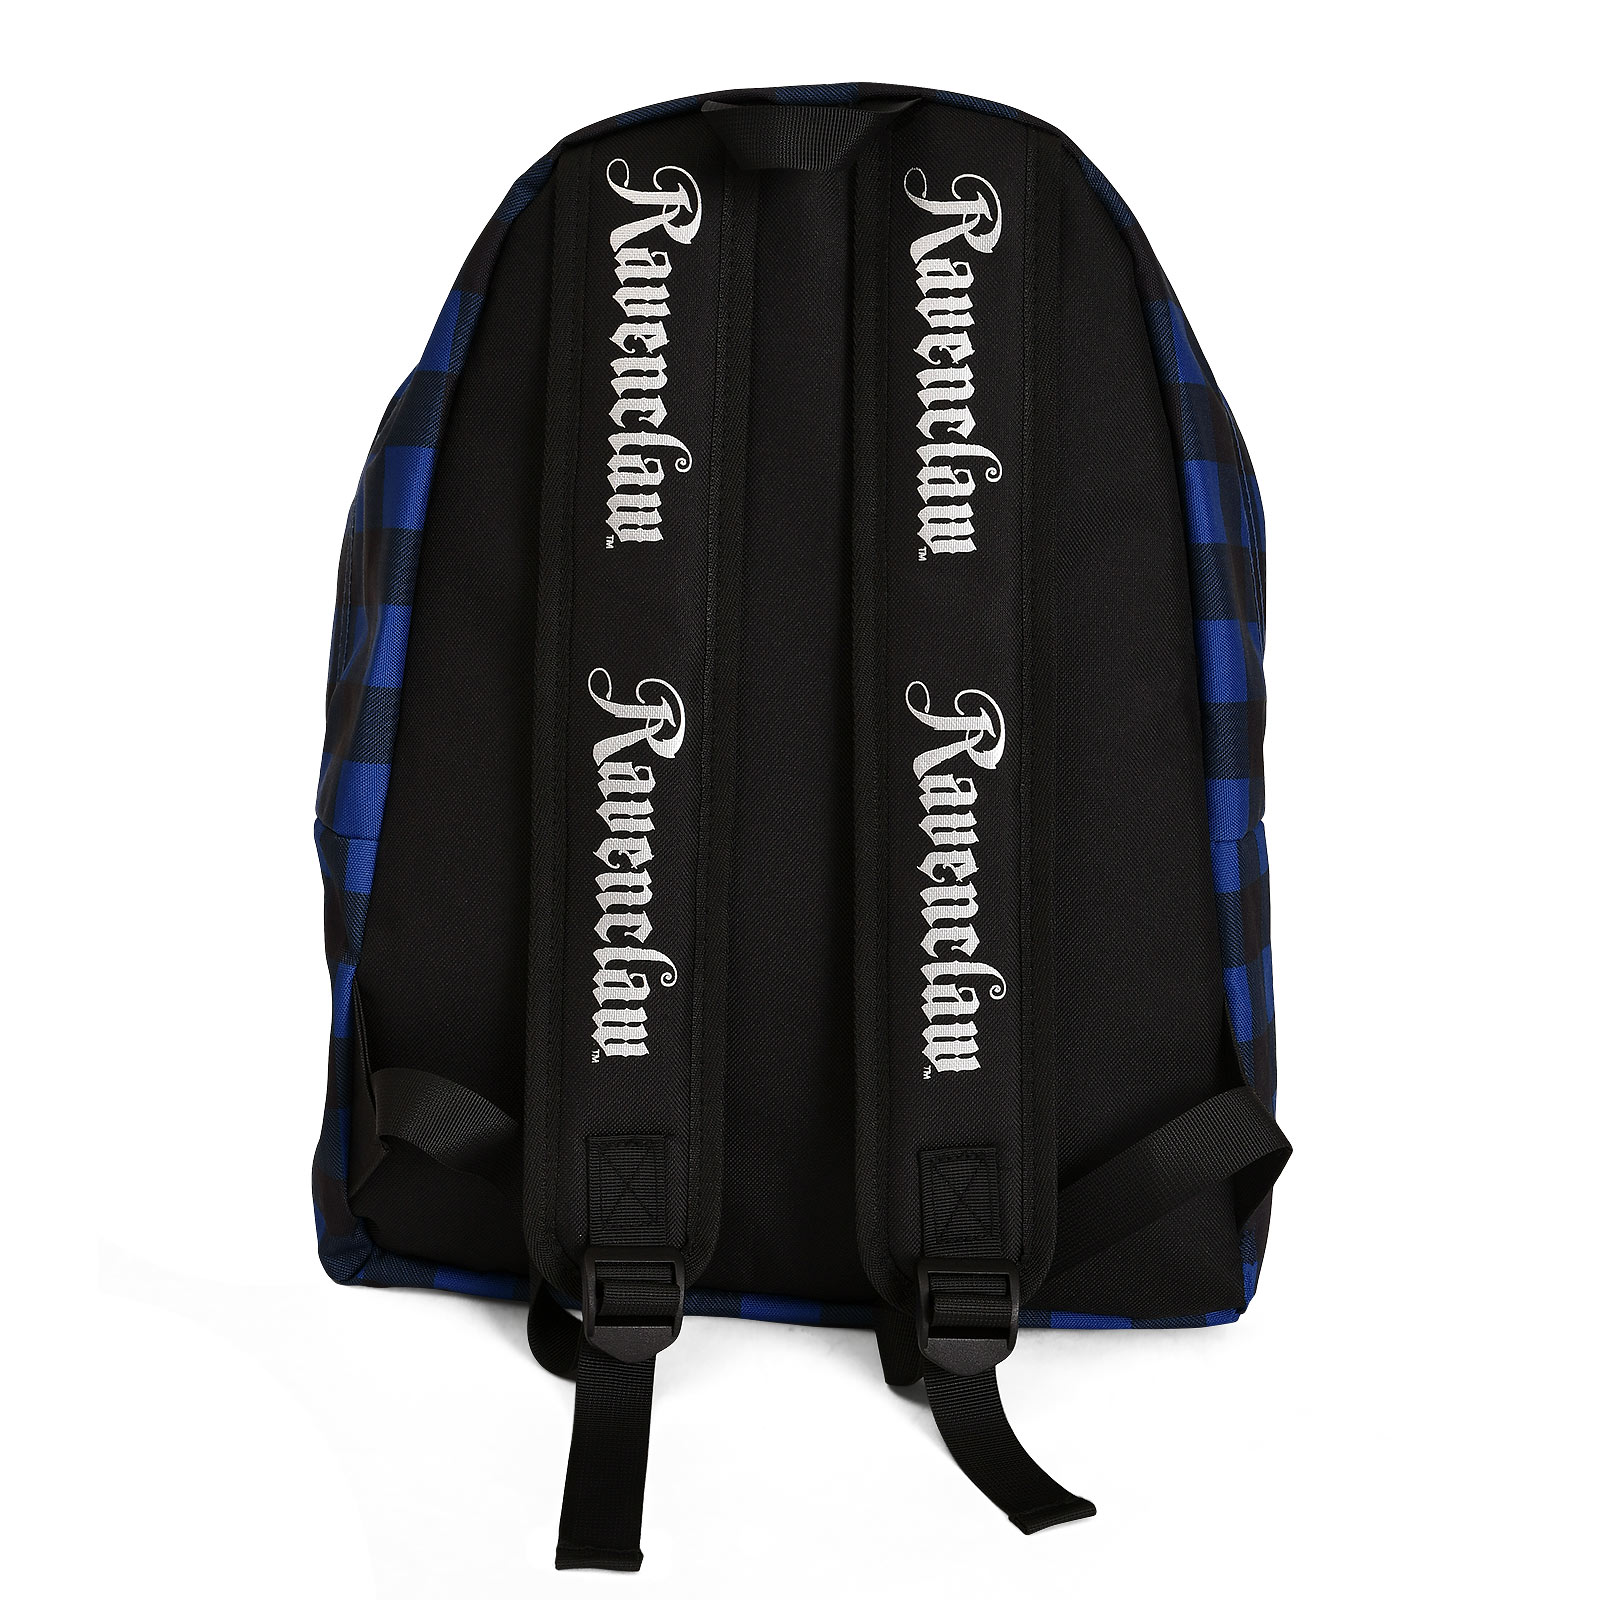 Harry Potter - Ravenclaw Crest Checkered Backpack